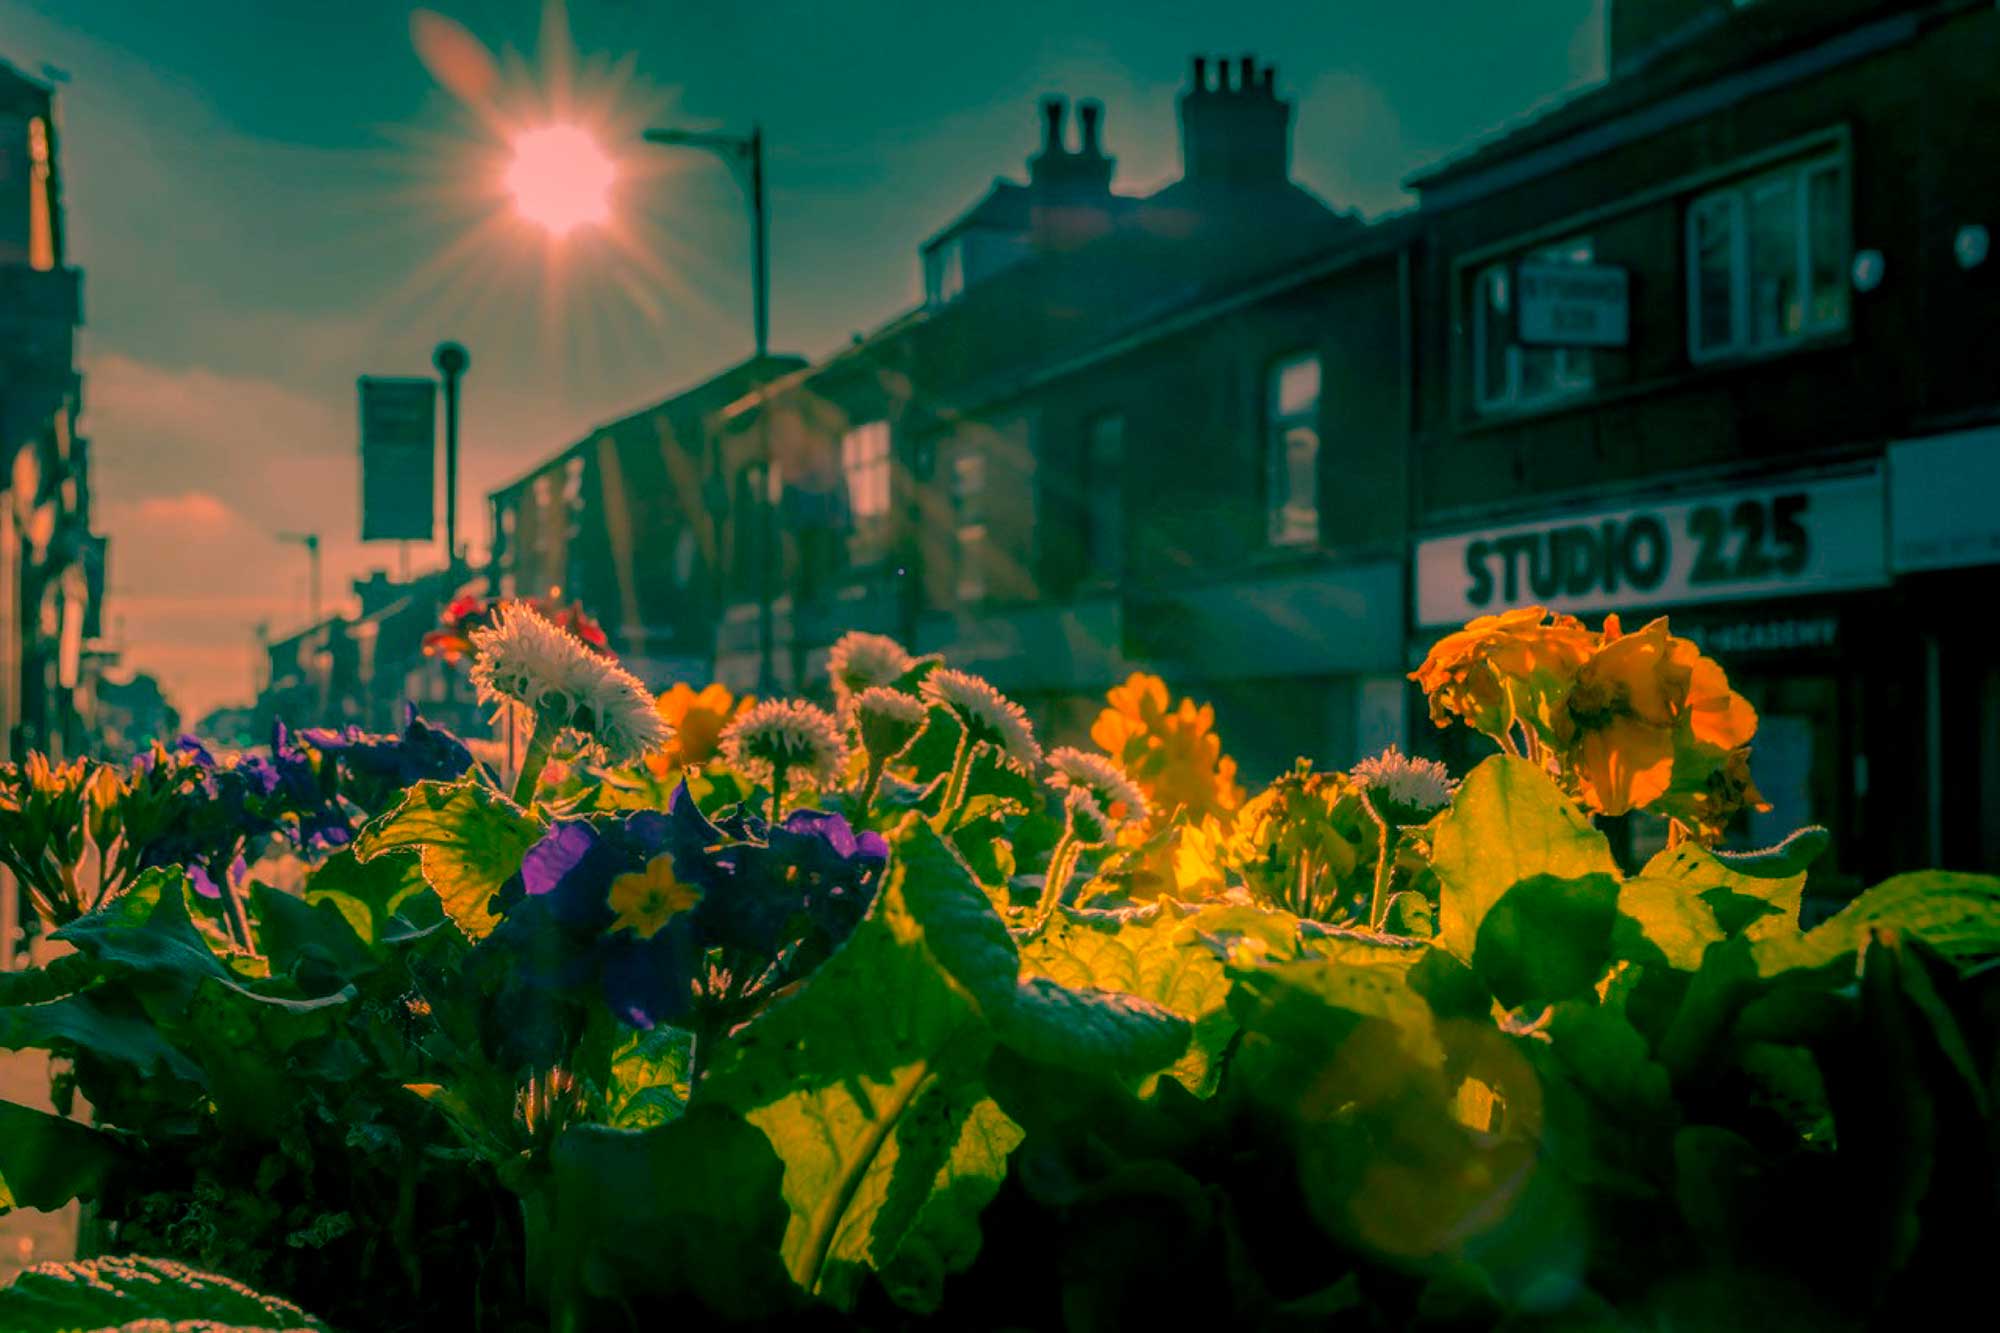 Flowers in a flower box on a high street with the sun setting behind it.